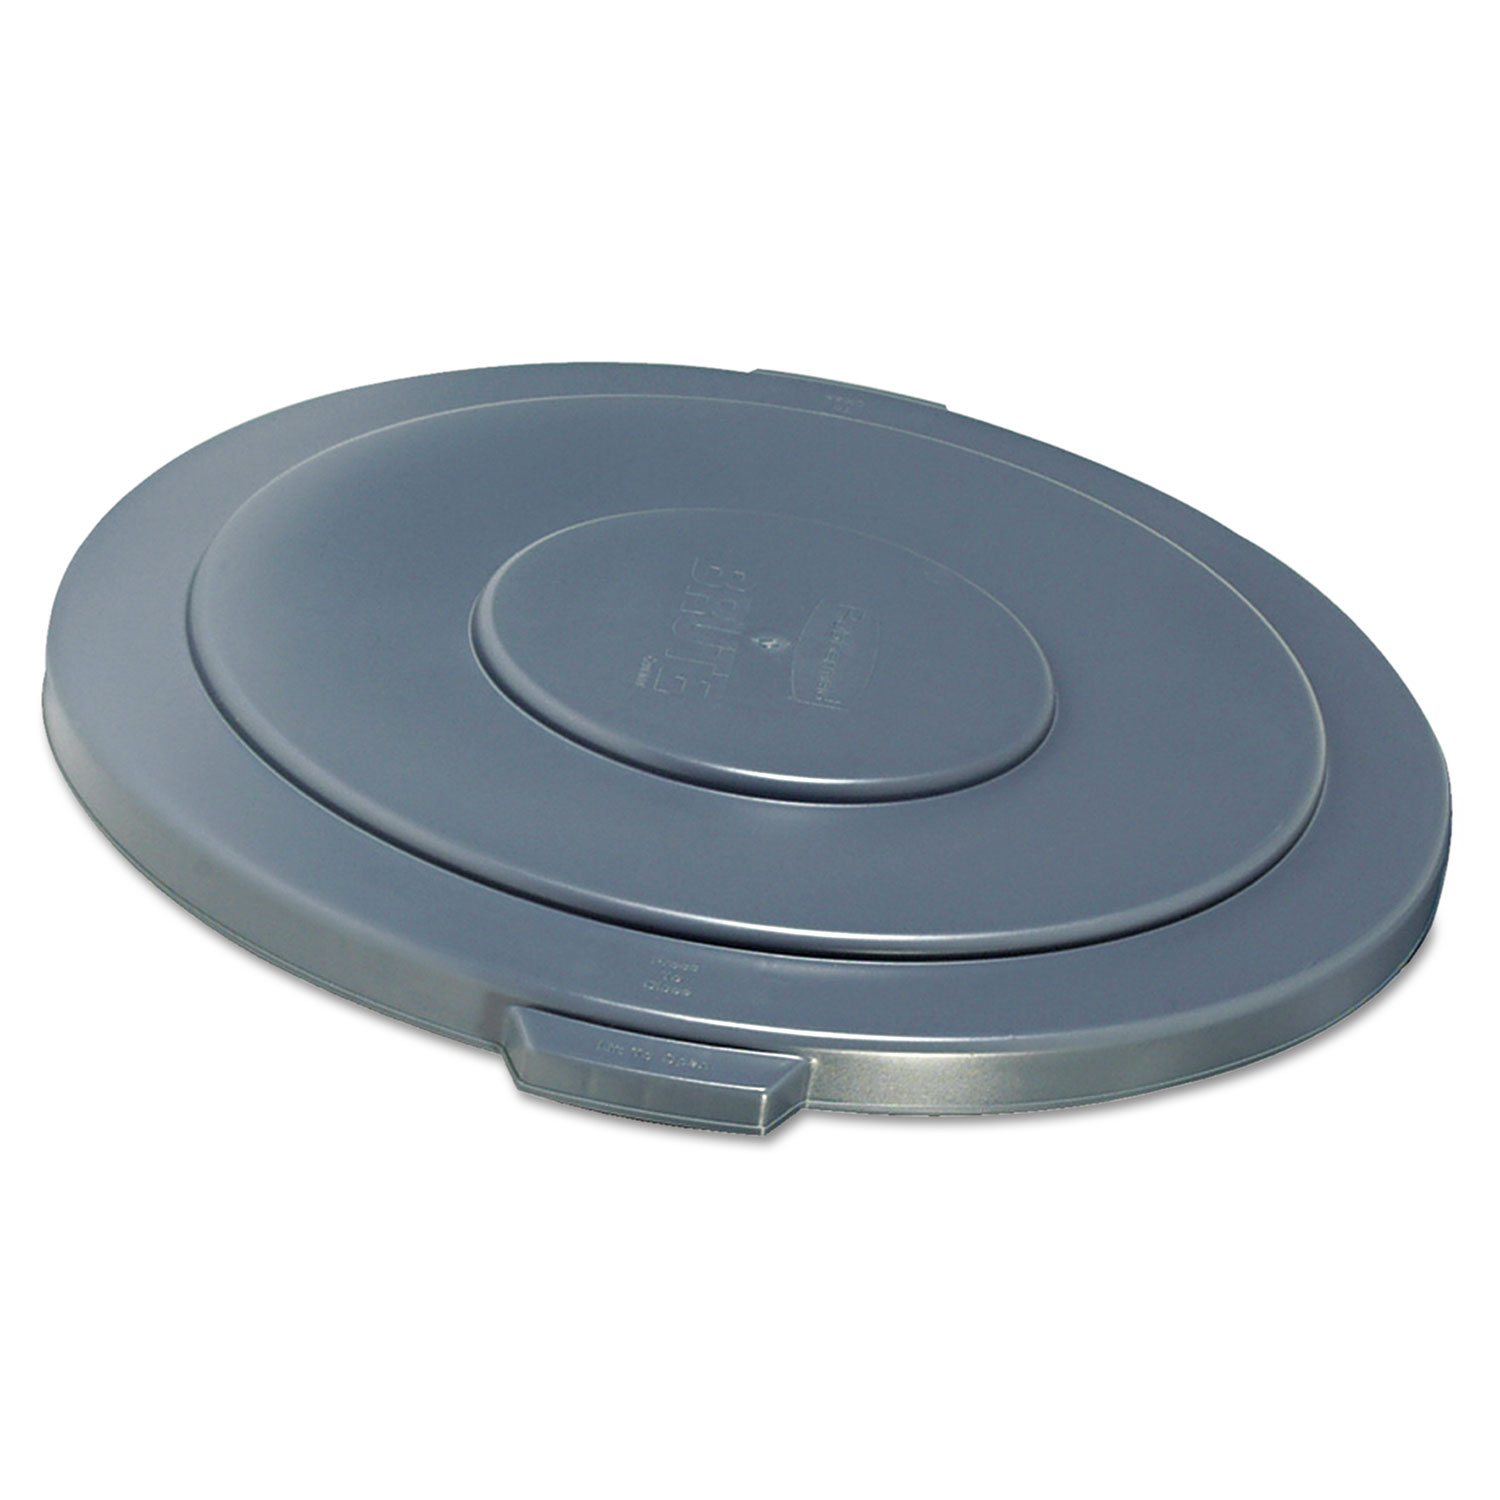 Round Flat Top Lid, for 55-Gallon Round Brute Containers, 26 3/4, dia., Gray